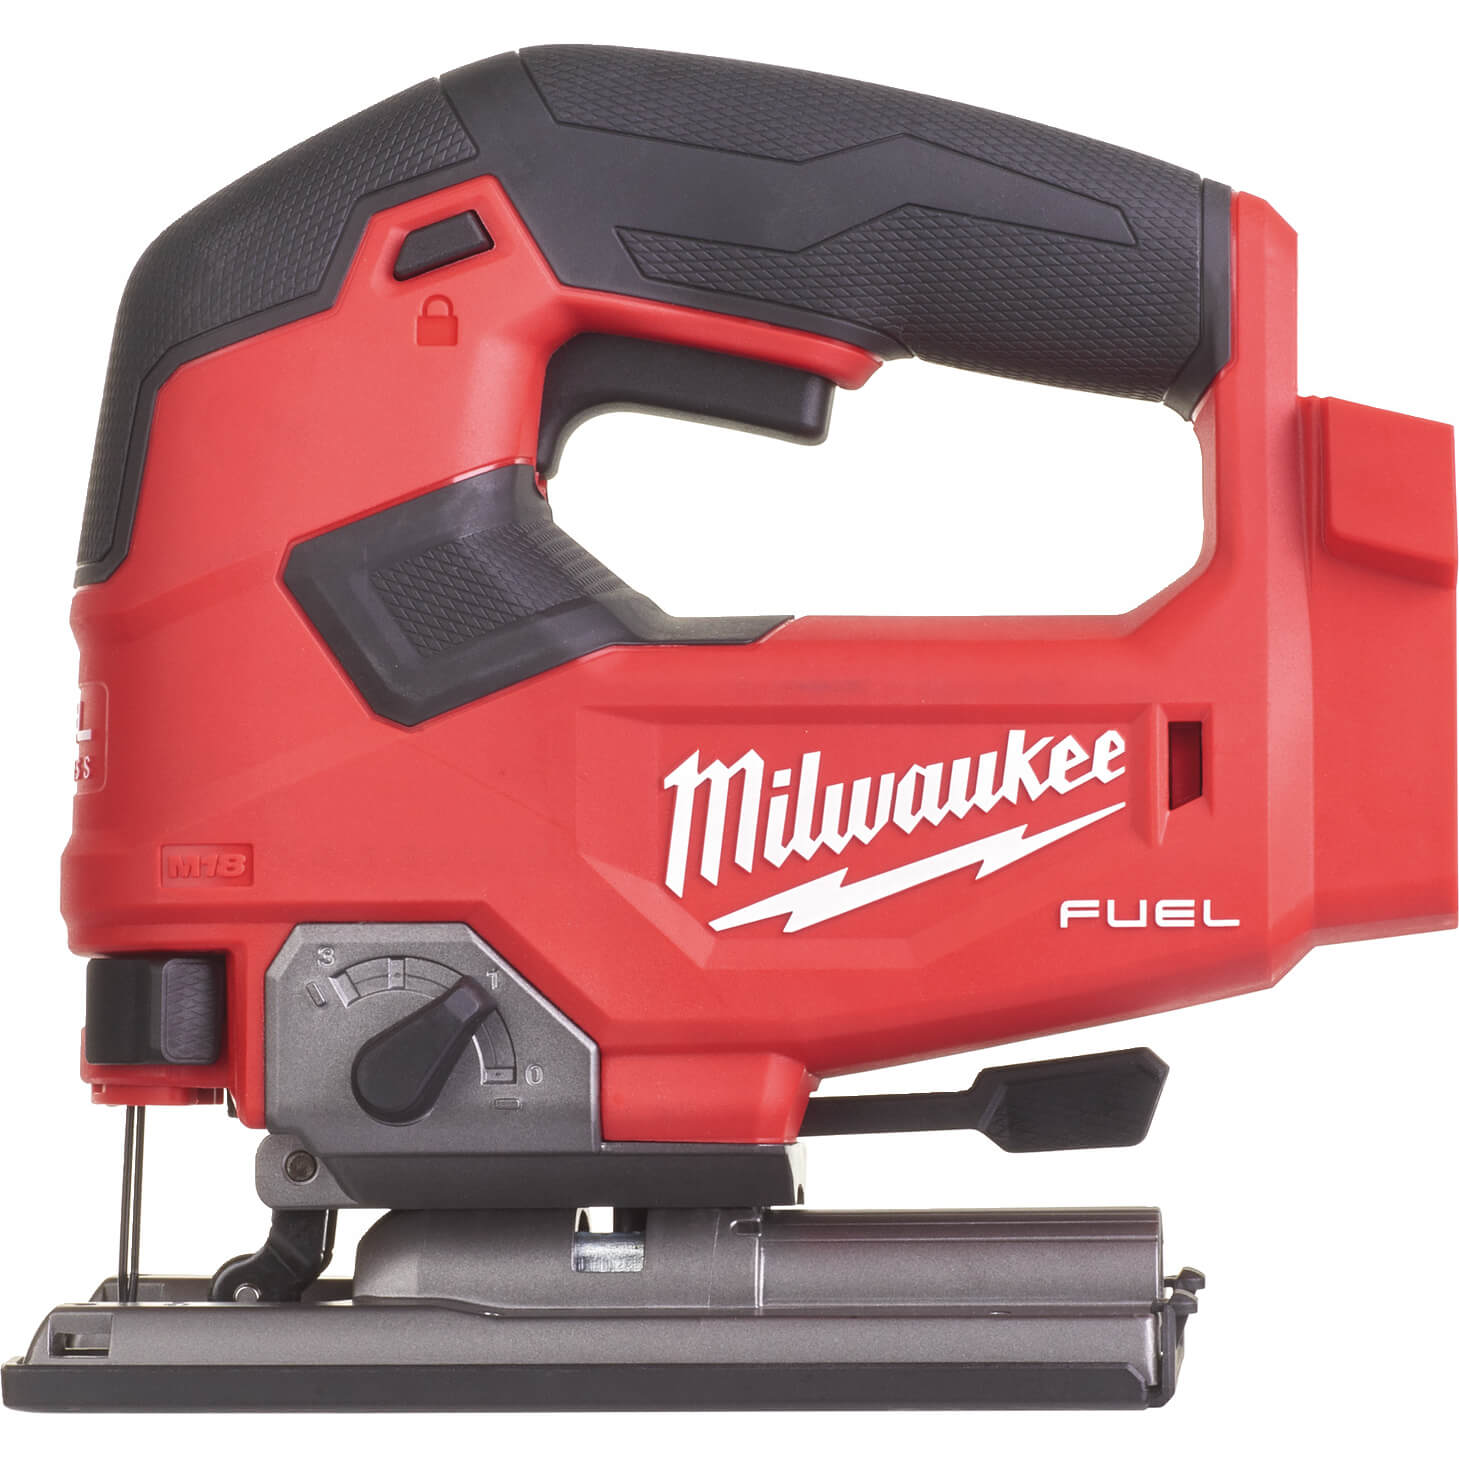 Image of Milwaukee M18 FJS Fuel 18v Cordless Brushless Jigsaw No Batteries No Charger Case